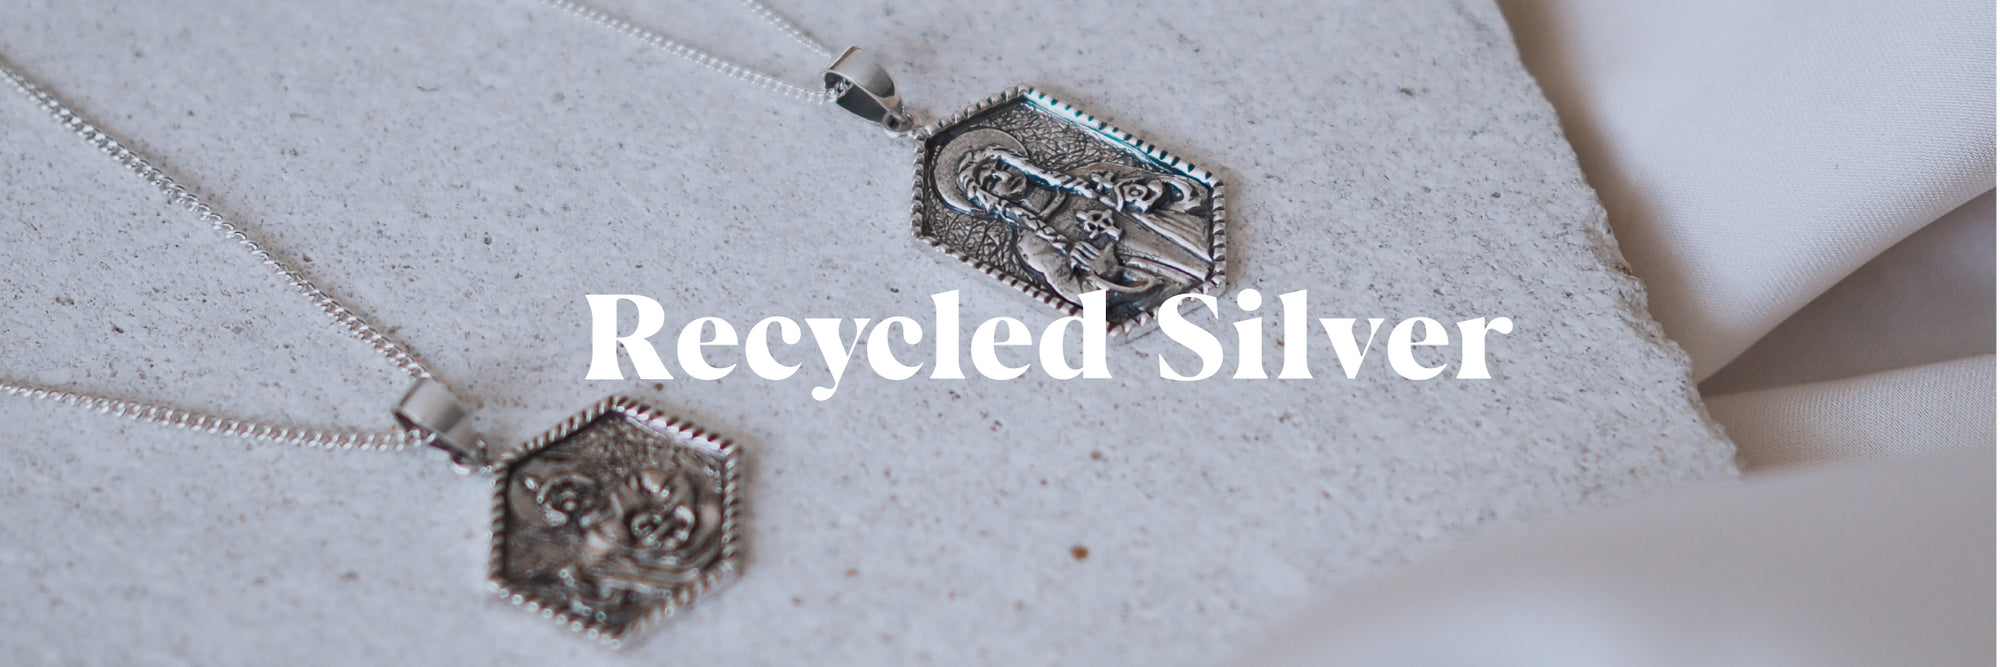 Recycled Sterling Silver